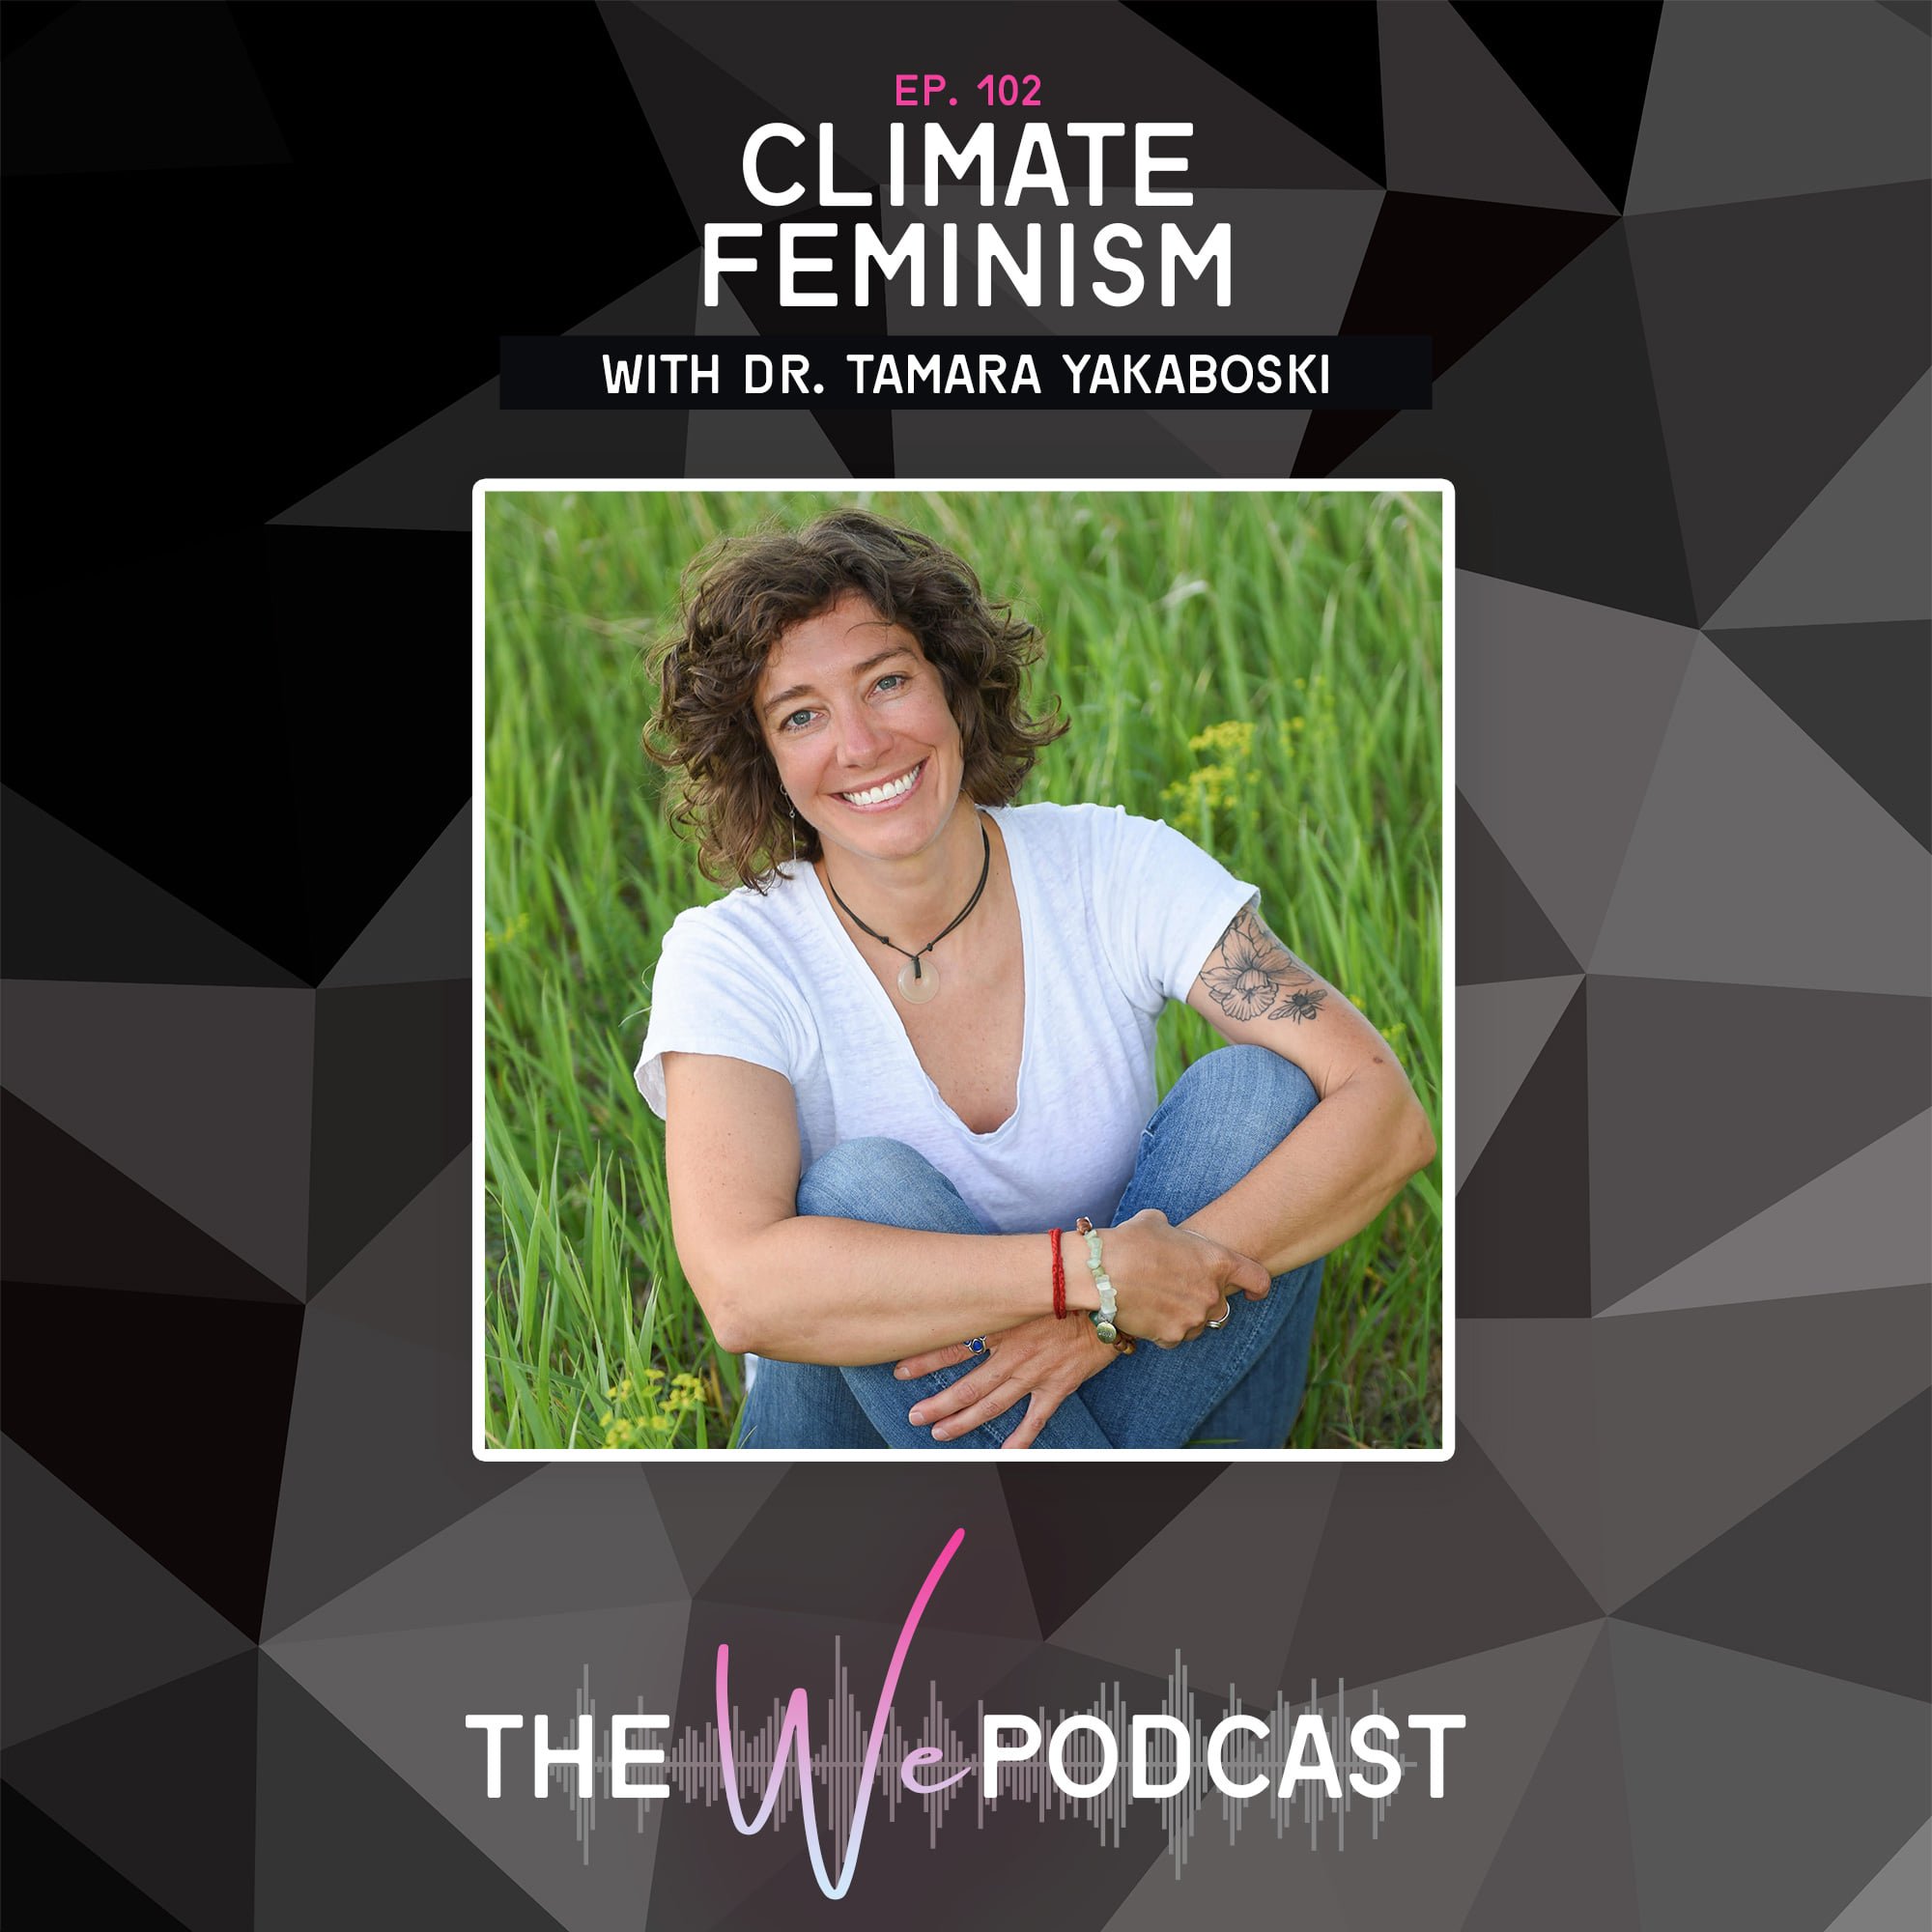 The We Podcast: Climate Feminism